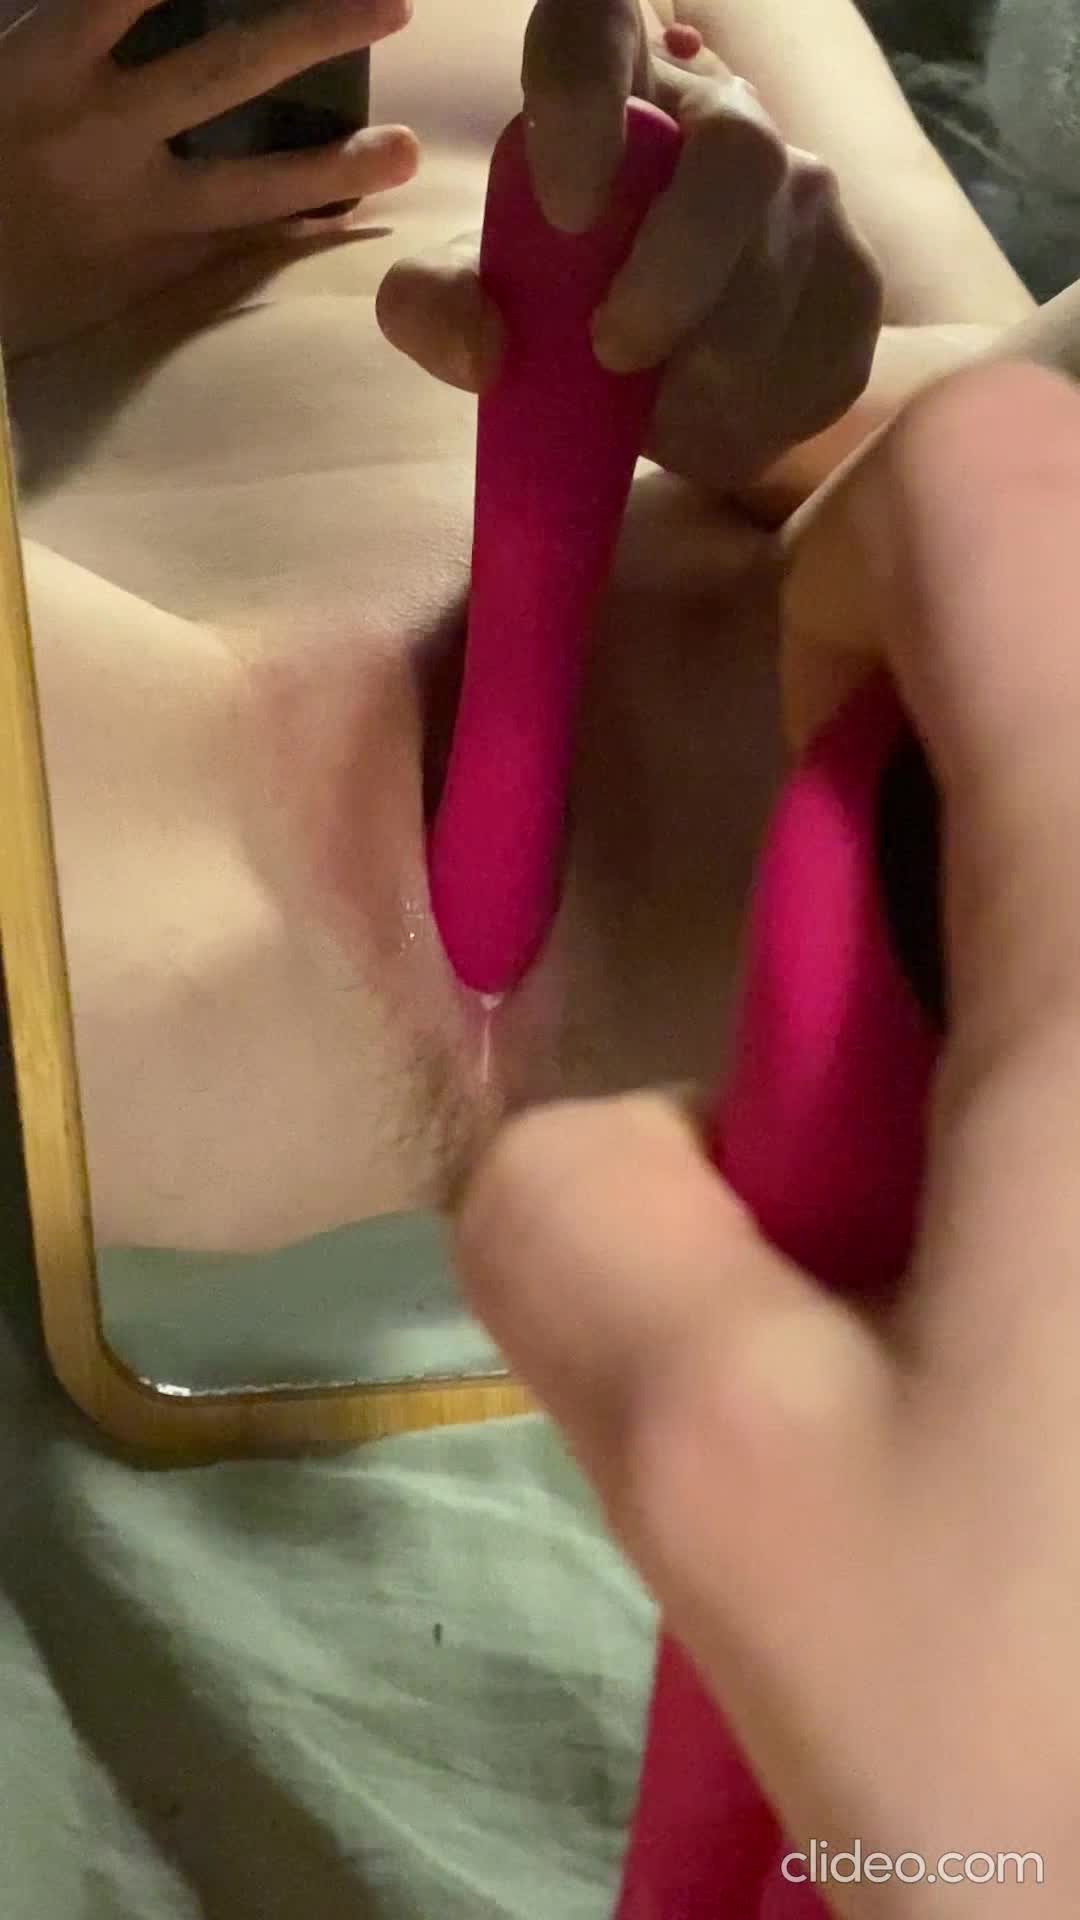 Shared Video by DollyErotika with the username @DollyErotika, who is a verified user,  April 10, 2024 at 1:19 AM. The post is about the topic Solo/Toys/Masturbation